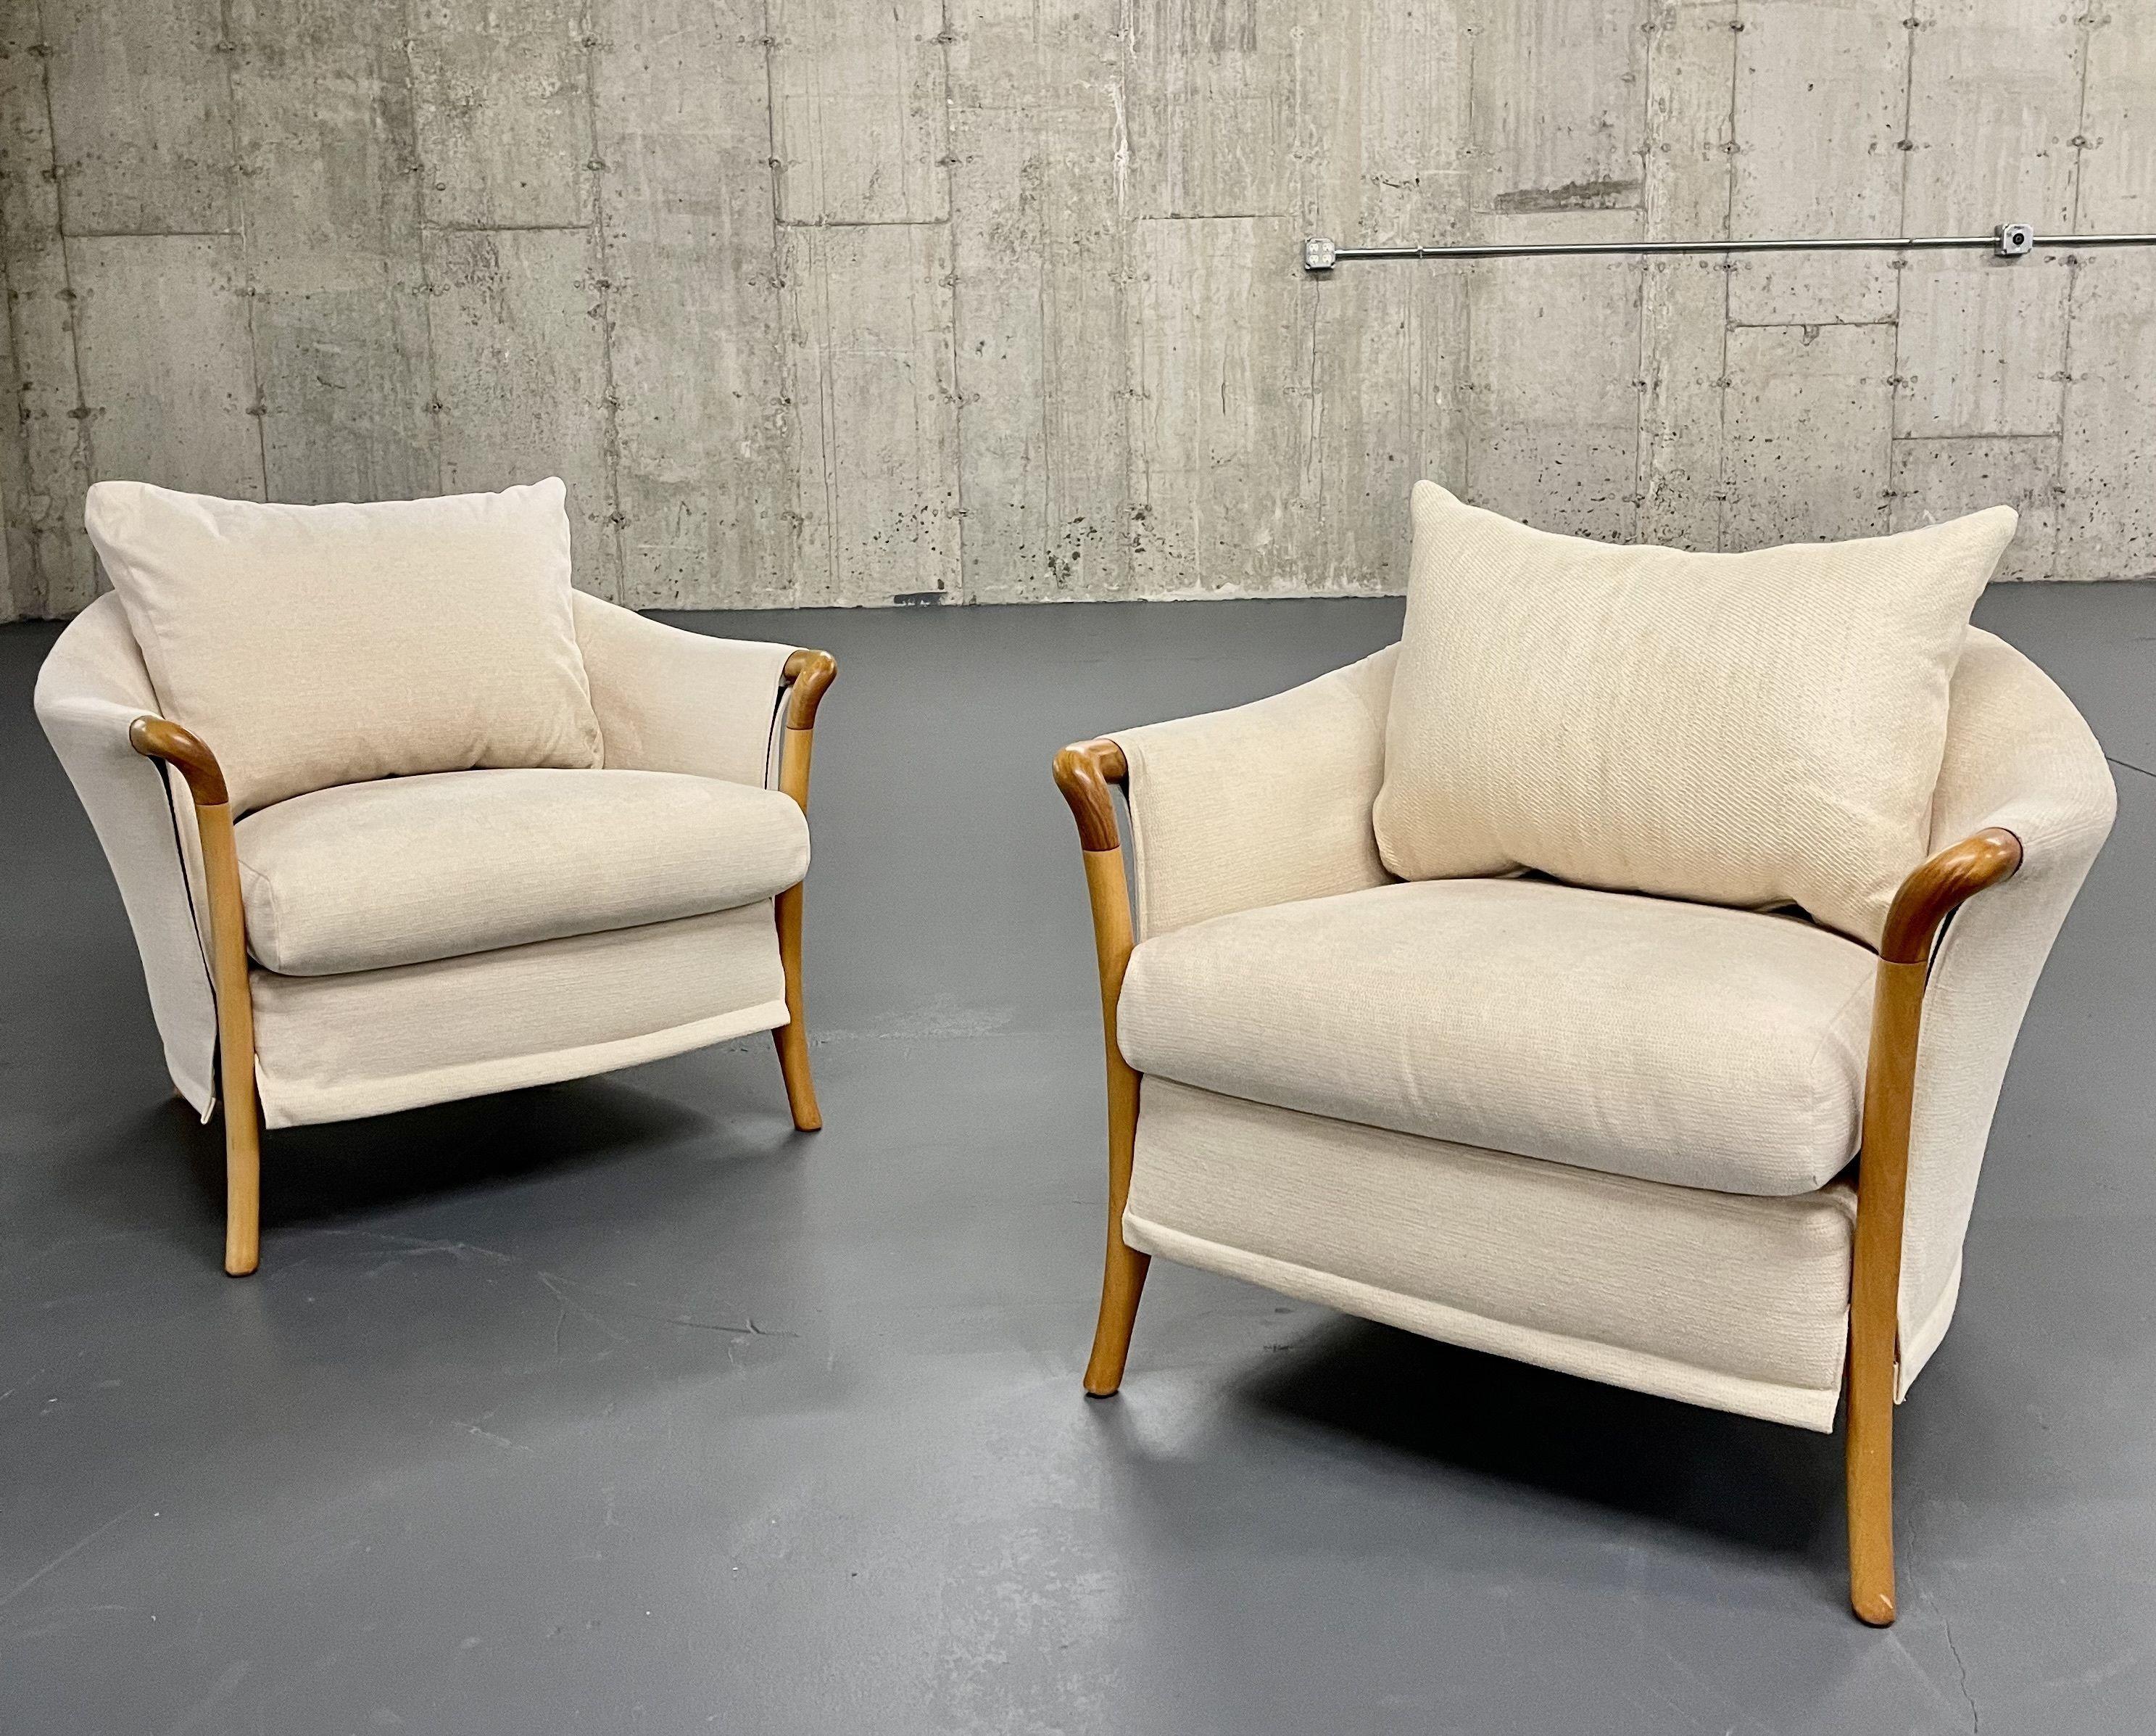 Italian Pair of Umberto Asnago for Giorgetti Lounge Chairs, Arm Chairs, Bergeres, Italy